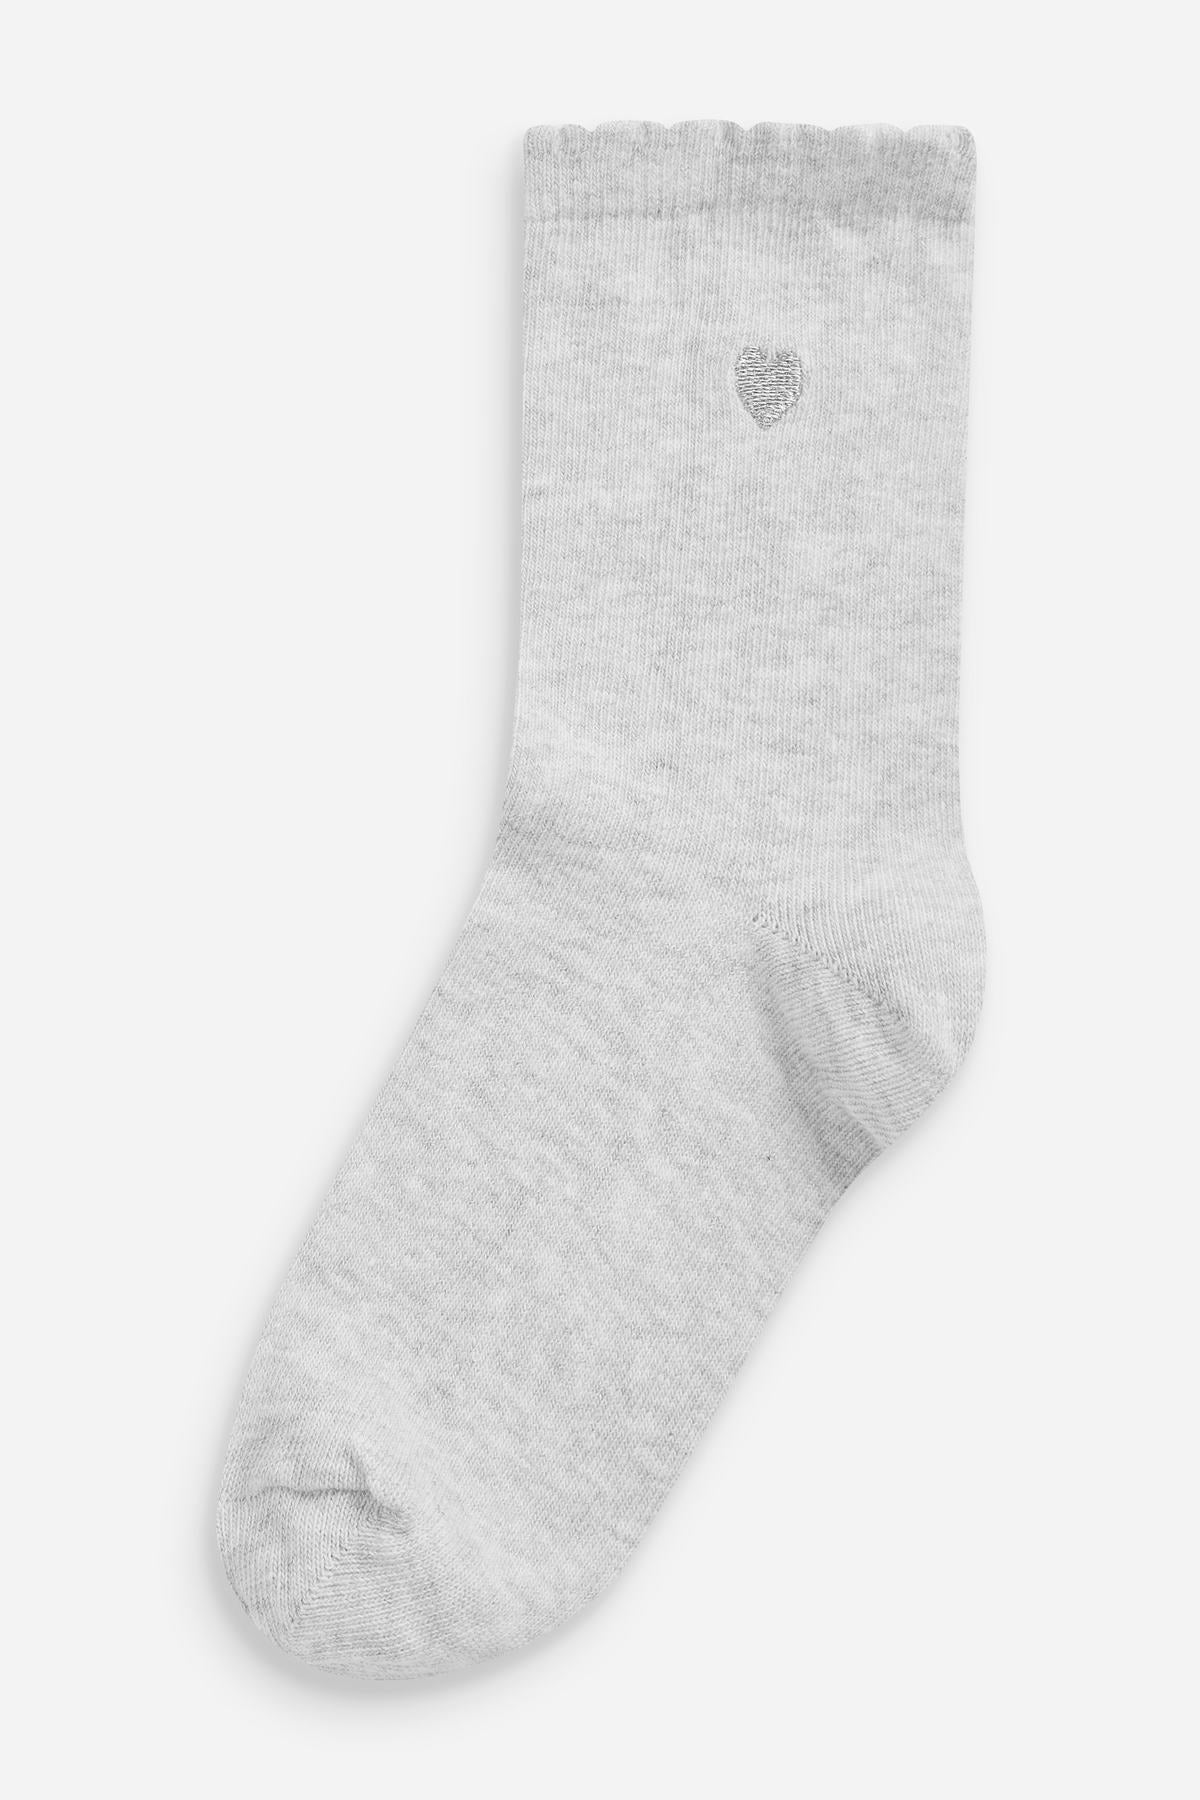 Multi 7 Pack Heart Embroidered Ankle Socks